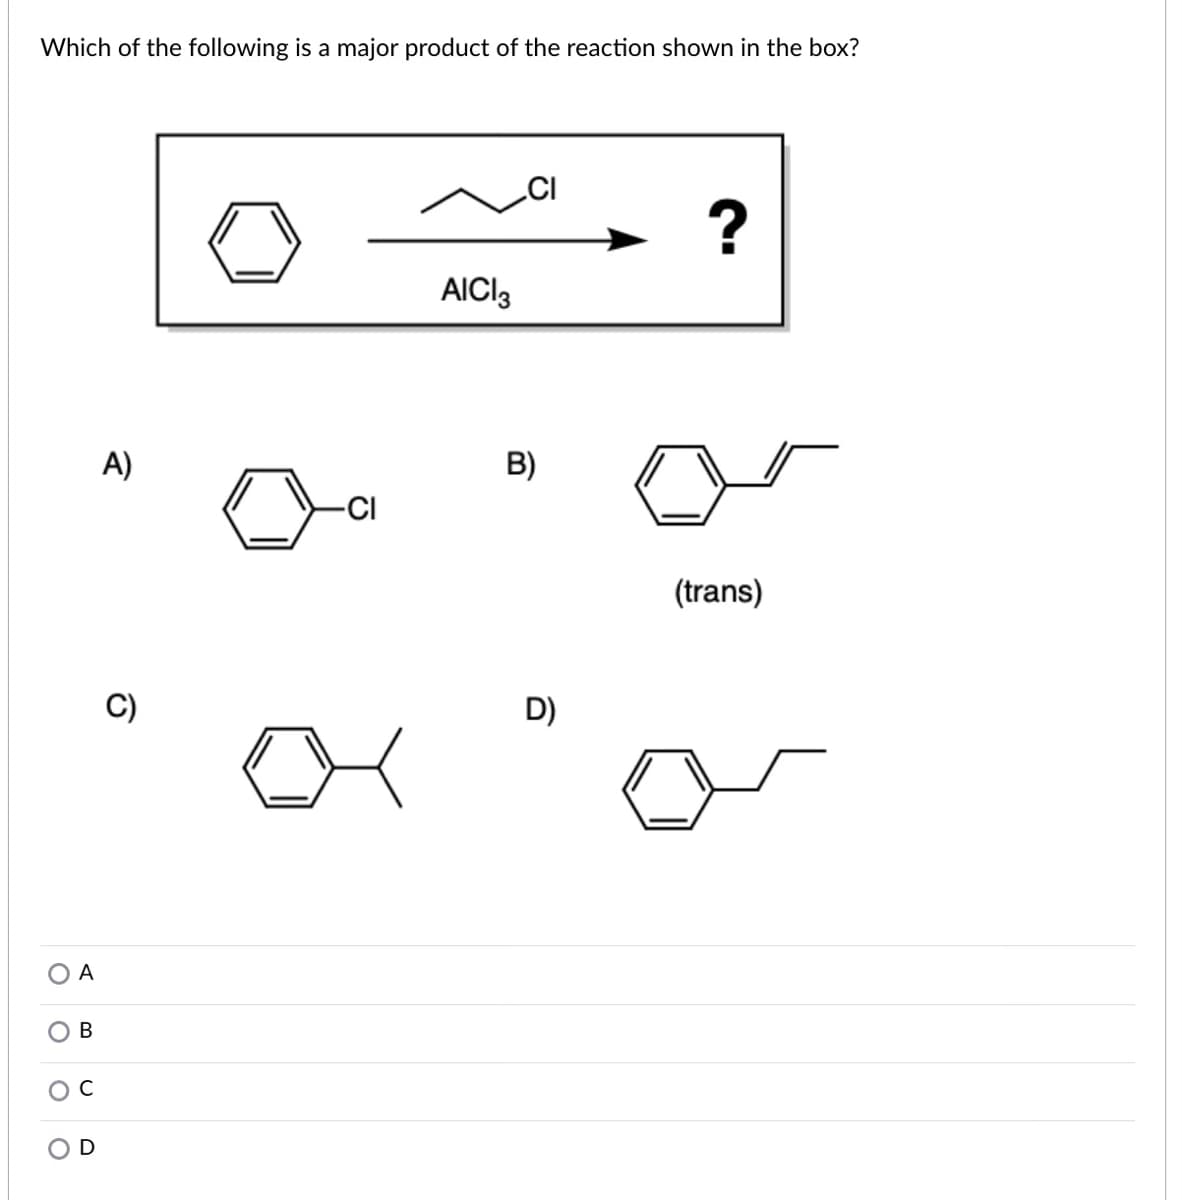 Which of the following is a major product of the reaction shown in the box?
.CI
?
AICI3
A)
B)
-CI
(trans)
C)
D)
O A
B
OD
